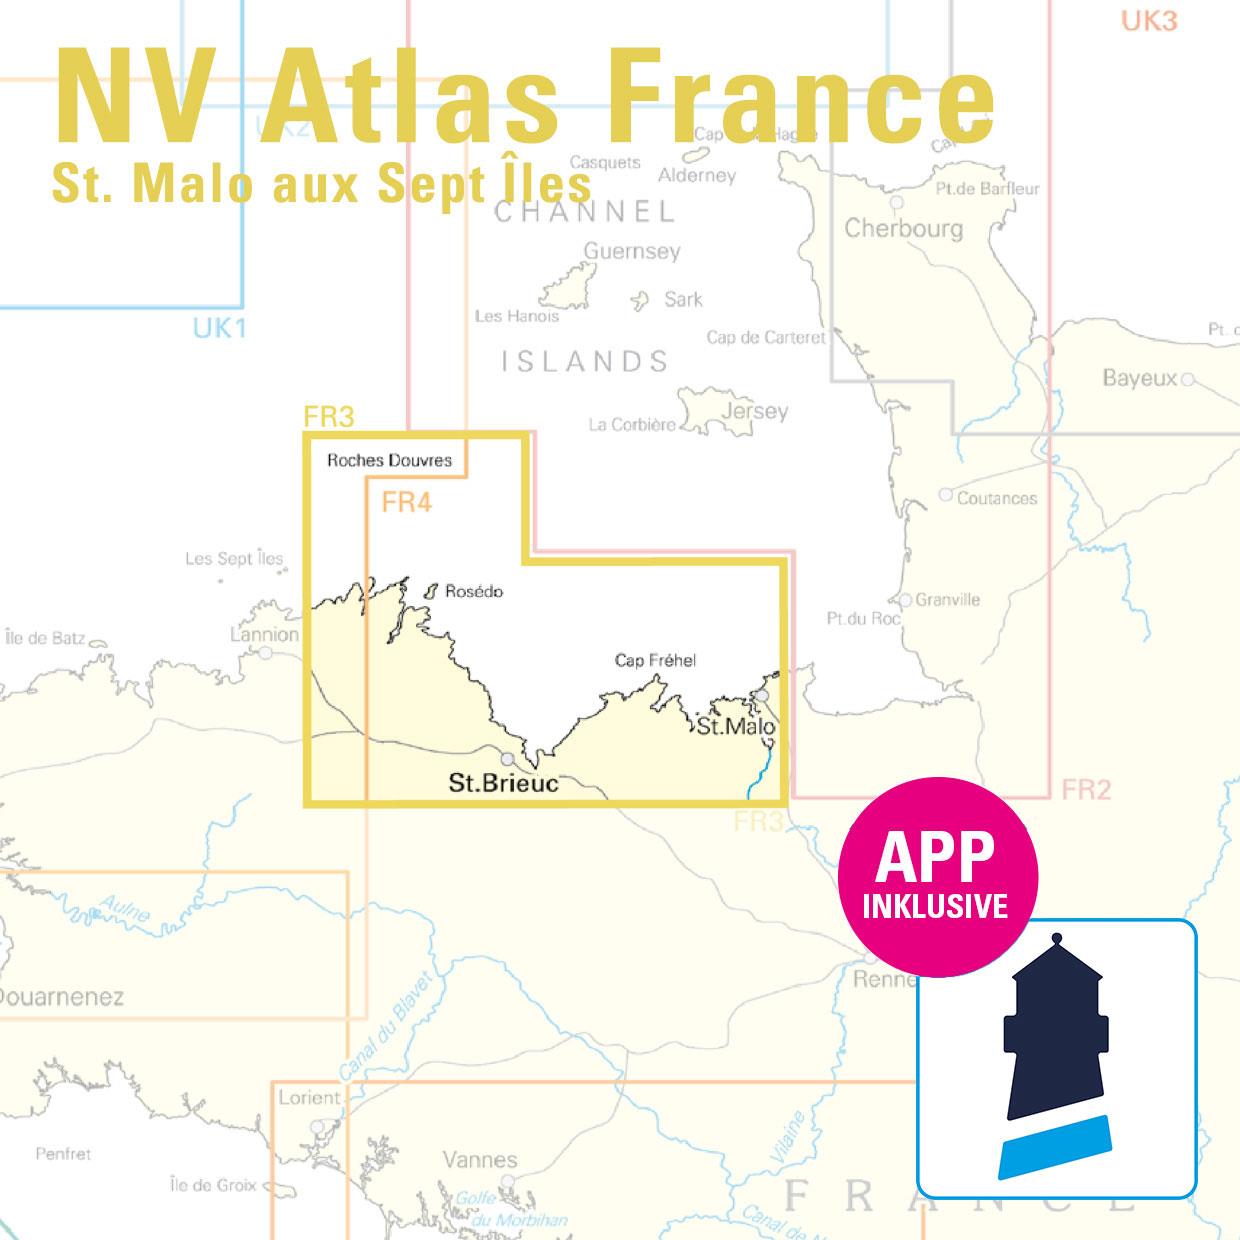 NV Charts France FR3 - St. Malo aux Sept Isles